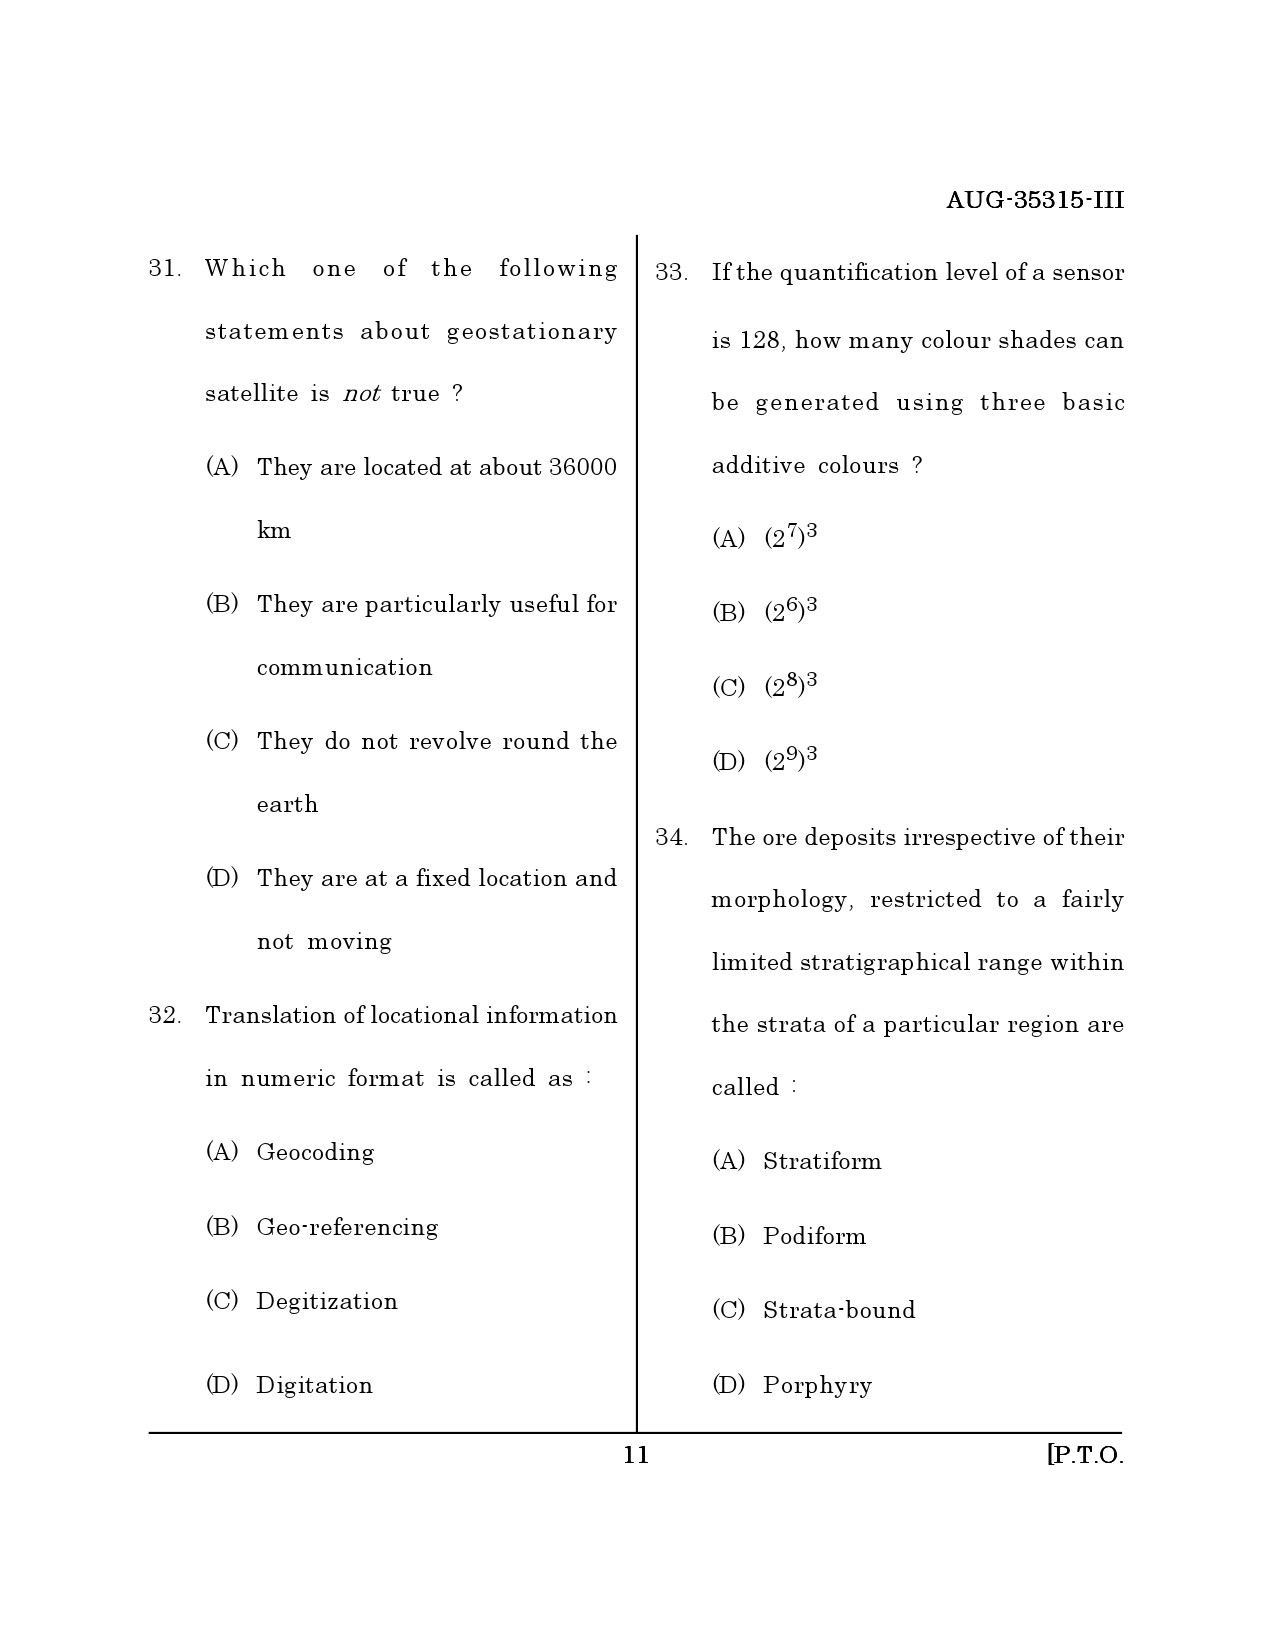 Maharashtra SET Earth Atmospheric Ocean Planetary Science Question Paper III August 2015 10